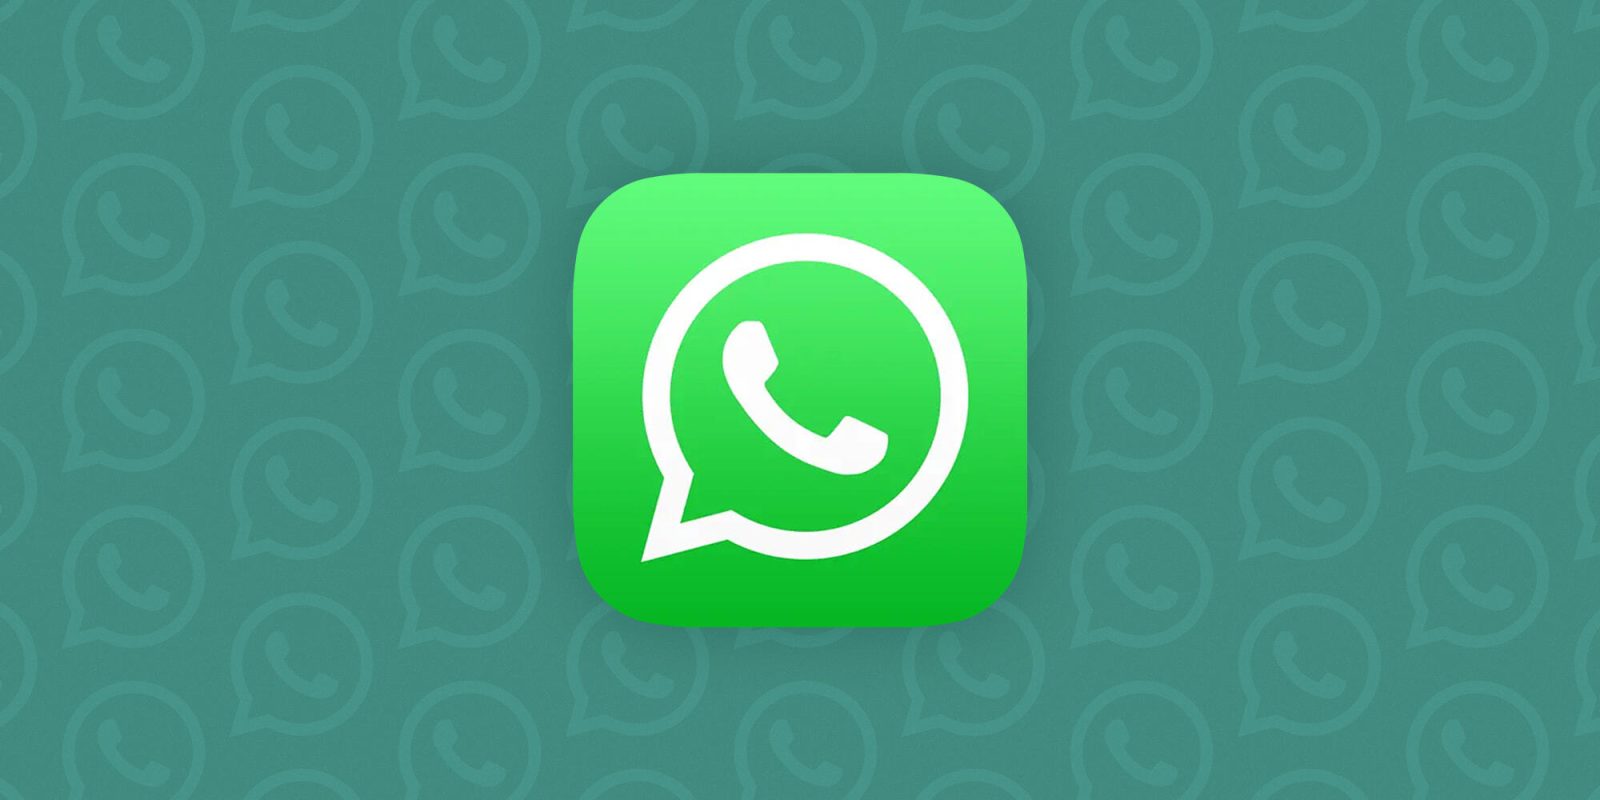 WhatsApp now lets users delete messages up to two days after they were sent